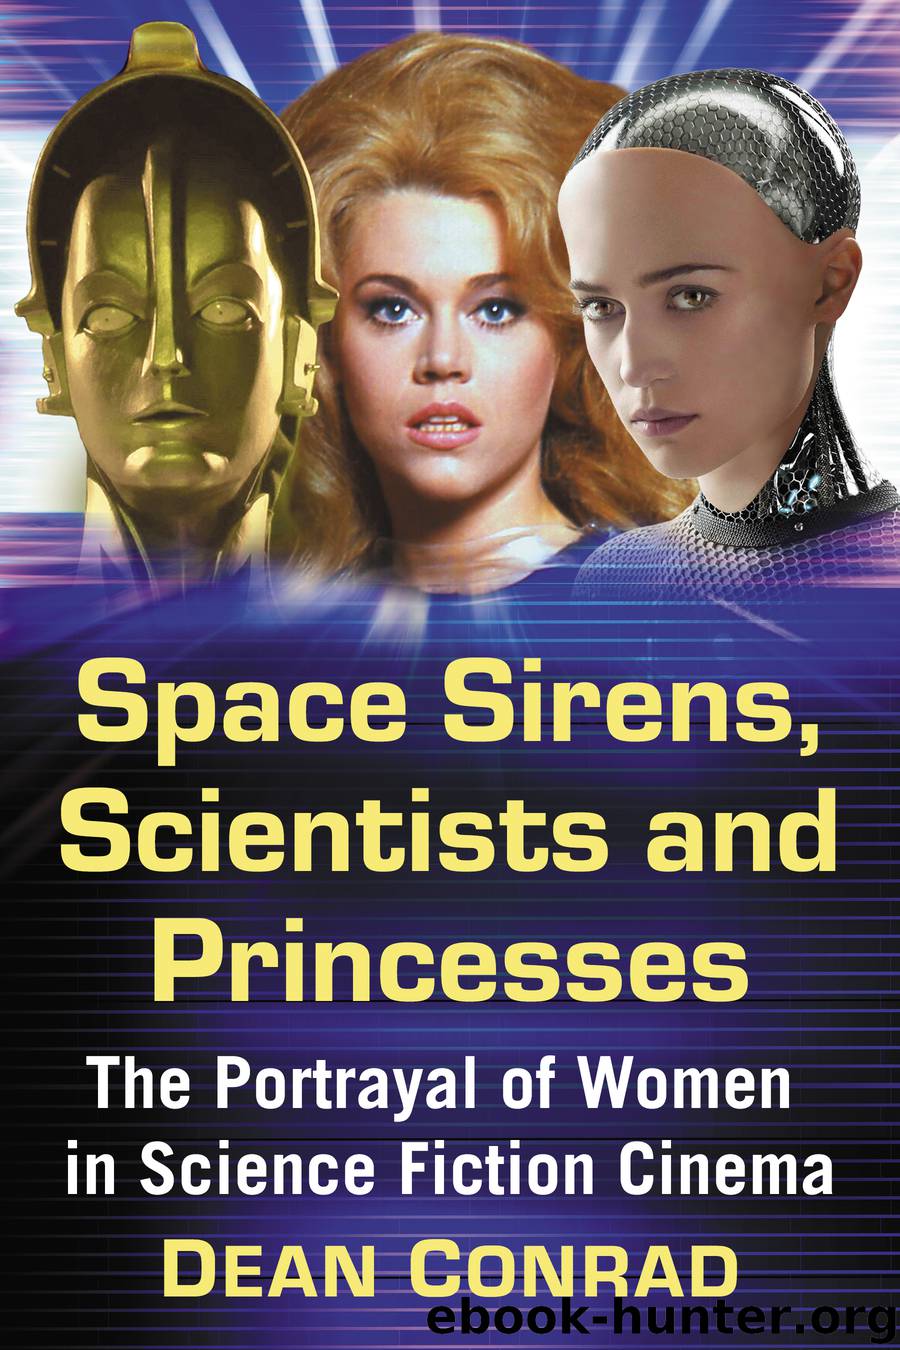 Space Sirens, Scientists and Princesses by Dean Conrad